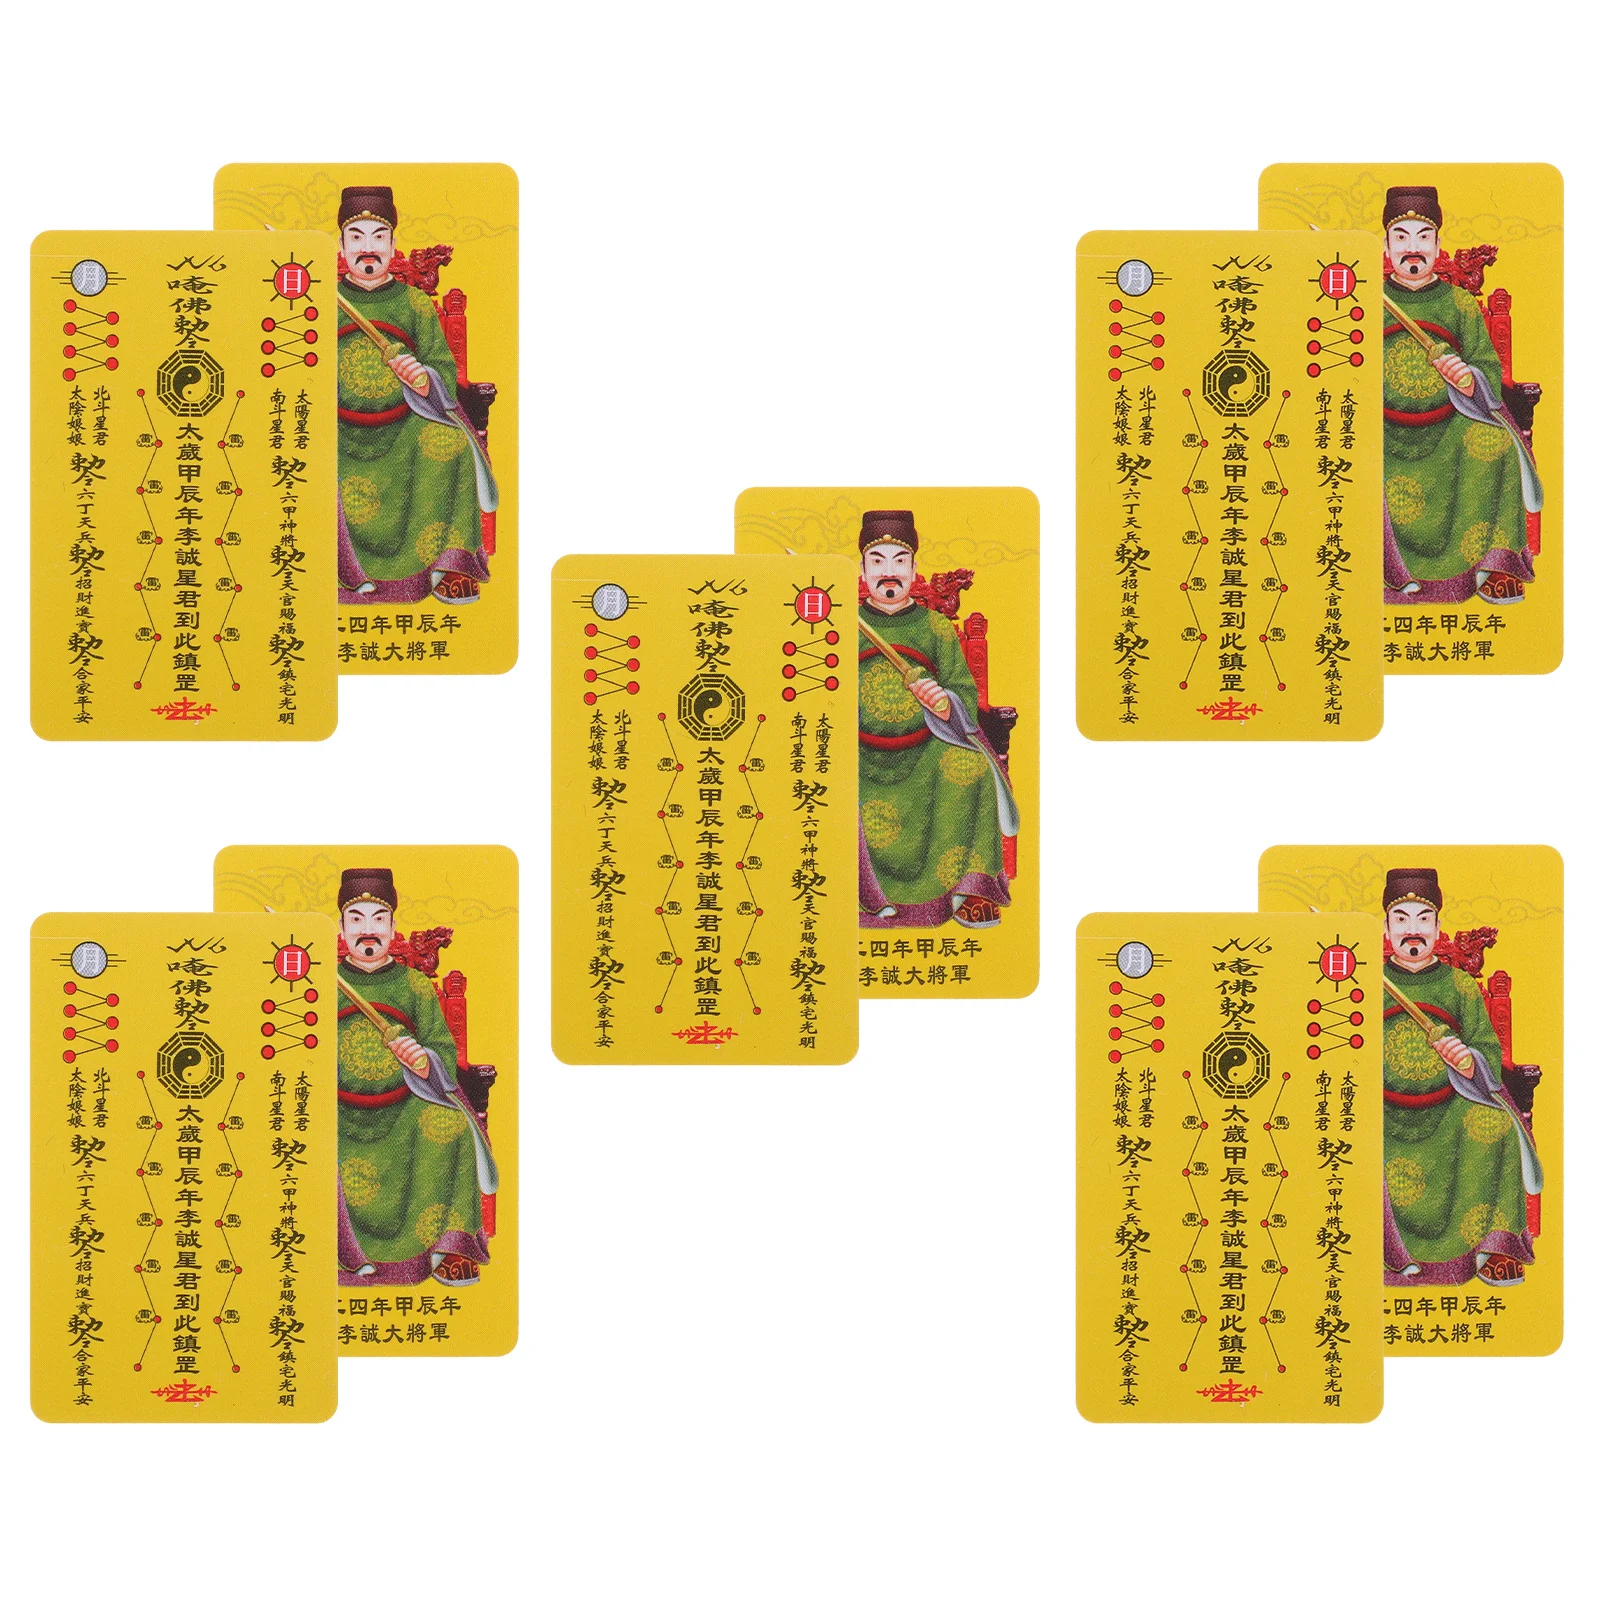 

10 Pcs Tai Sui Card Religious Amulet Bathroom Decorations Chinese Fortune Style Spiritual Delicate Traditional